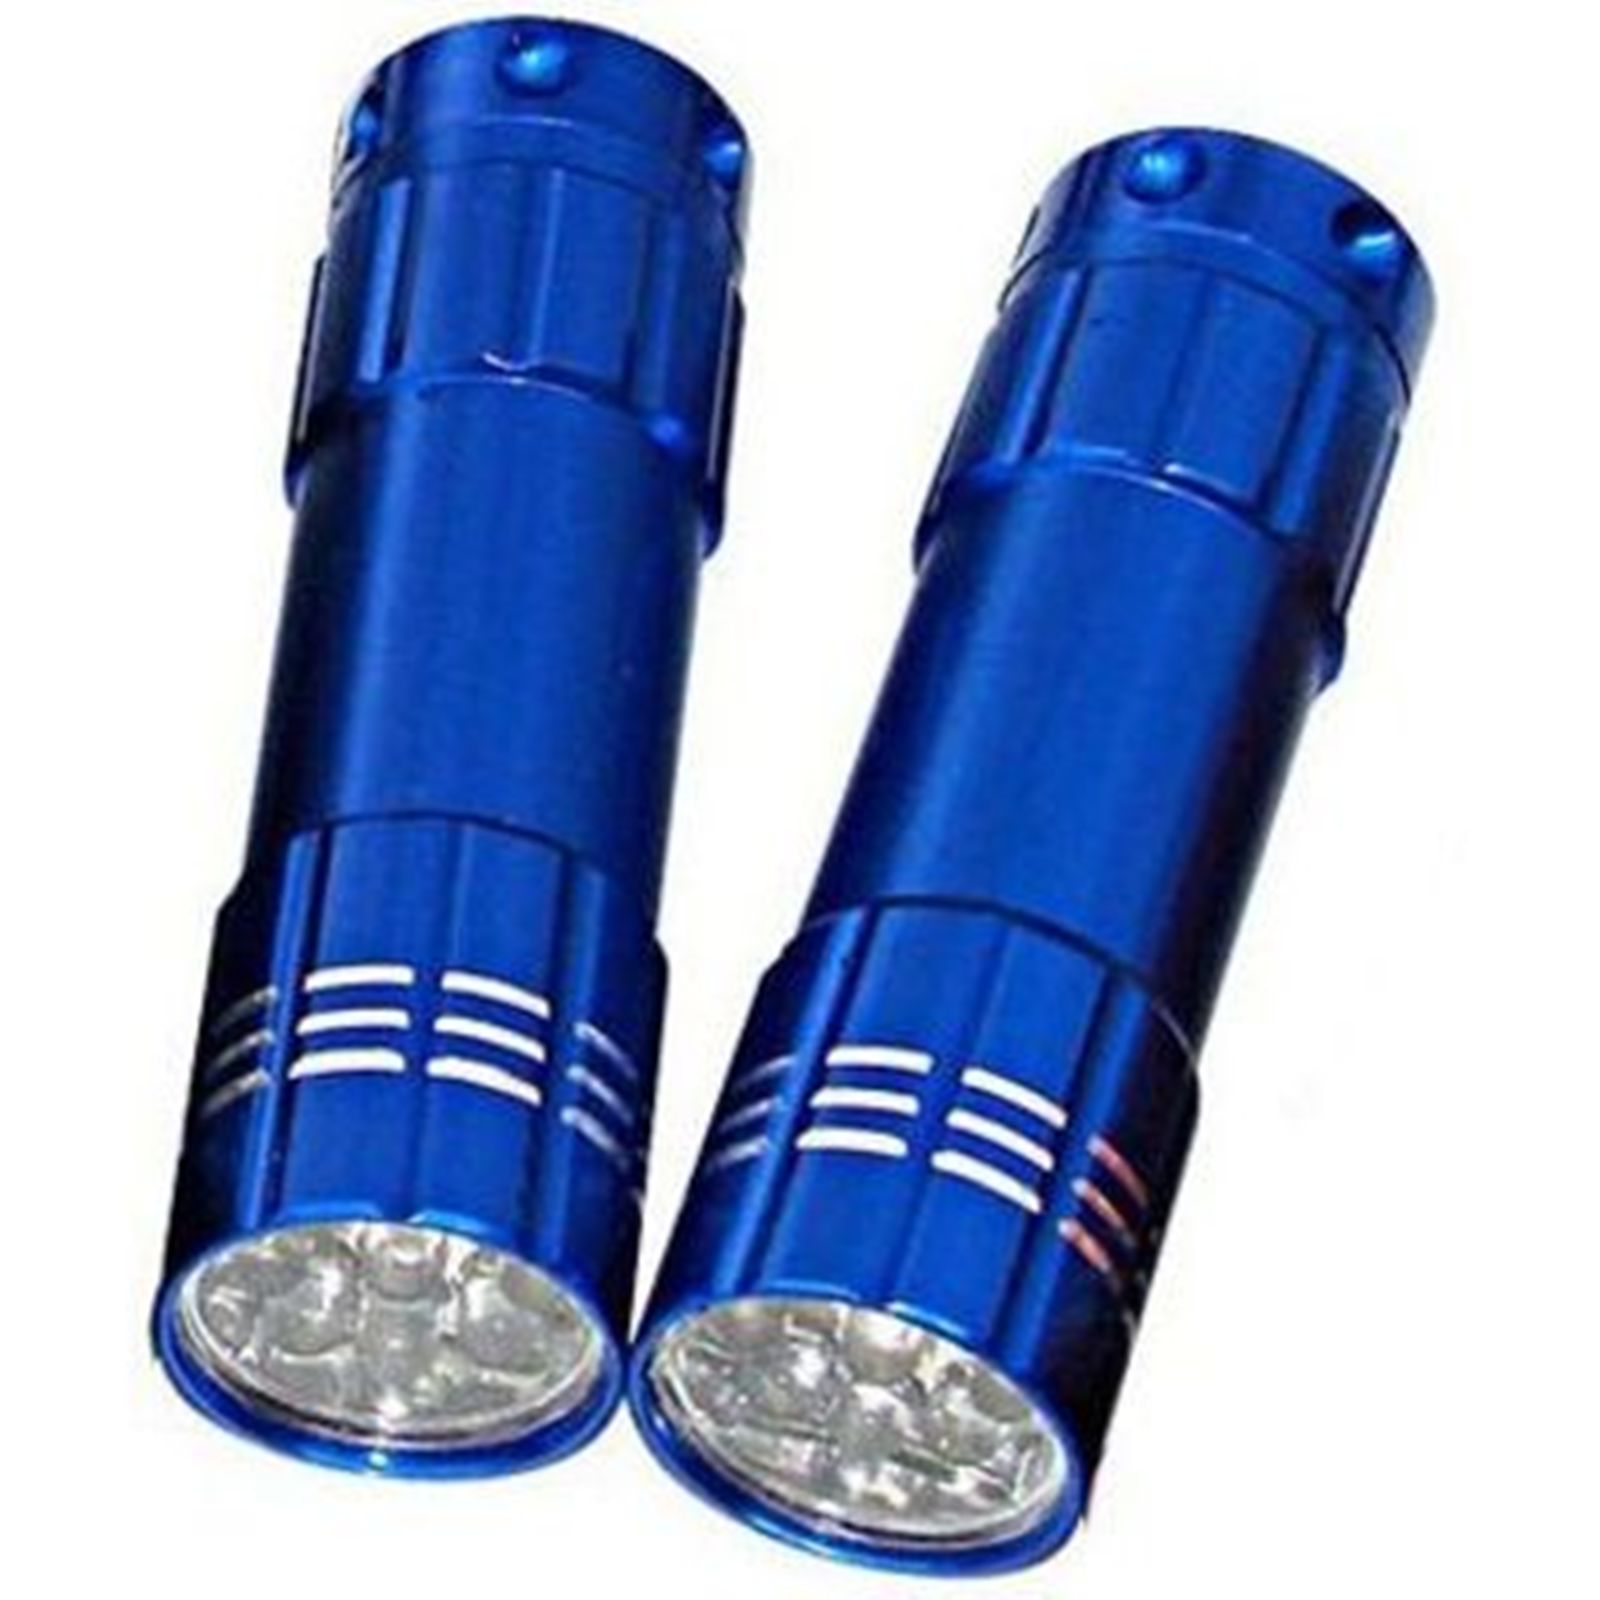 Dorcy 9 LED Flashlight  Pack of 2 (colors vary)